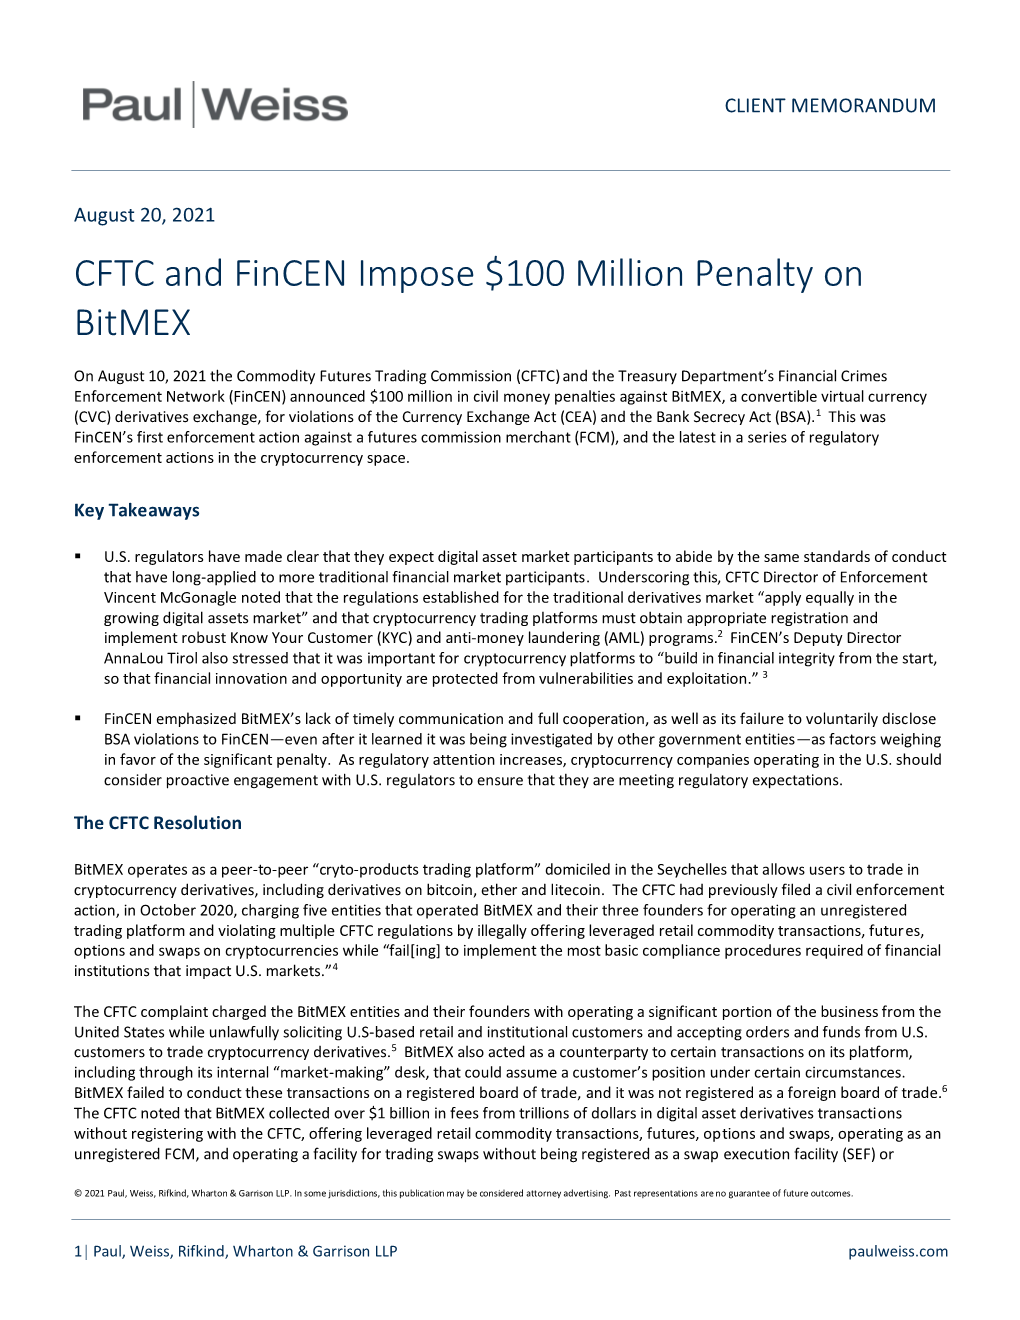 CFTC and Fincen Impose $100 Million Penalty on Bitmex